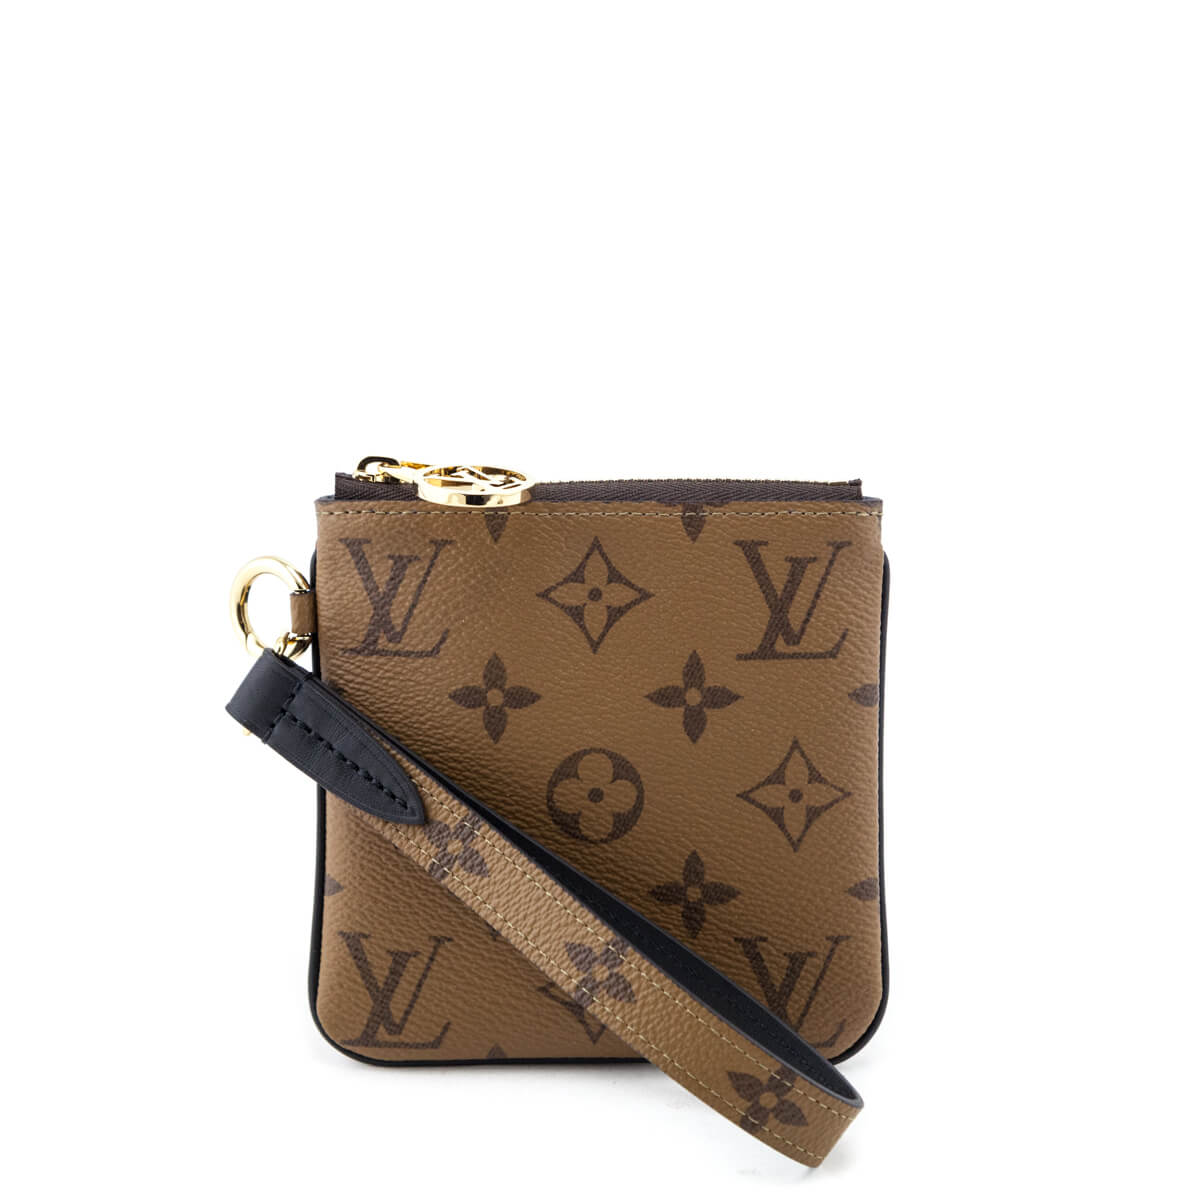 Lv Trio Pouch Reviewed  Natural Resource Department